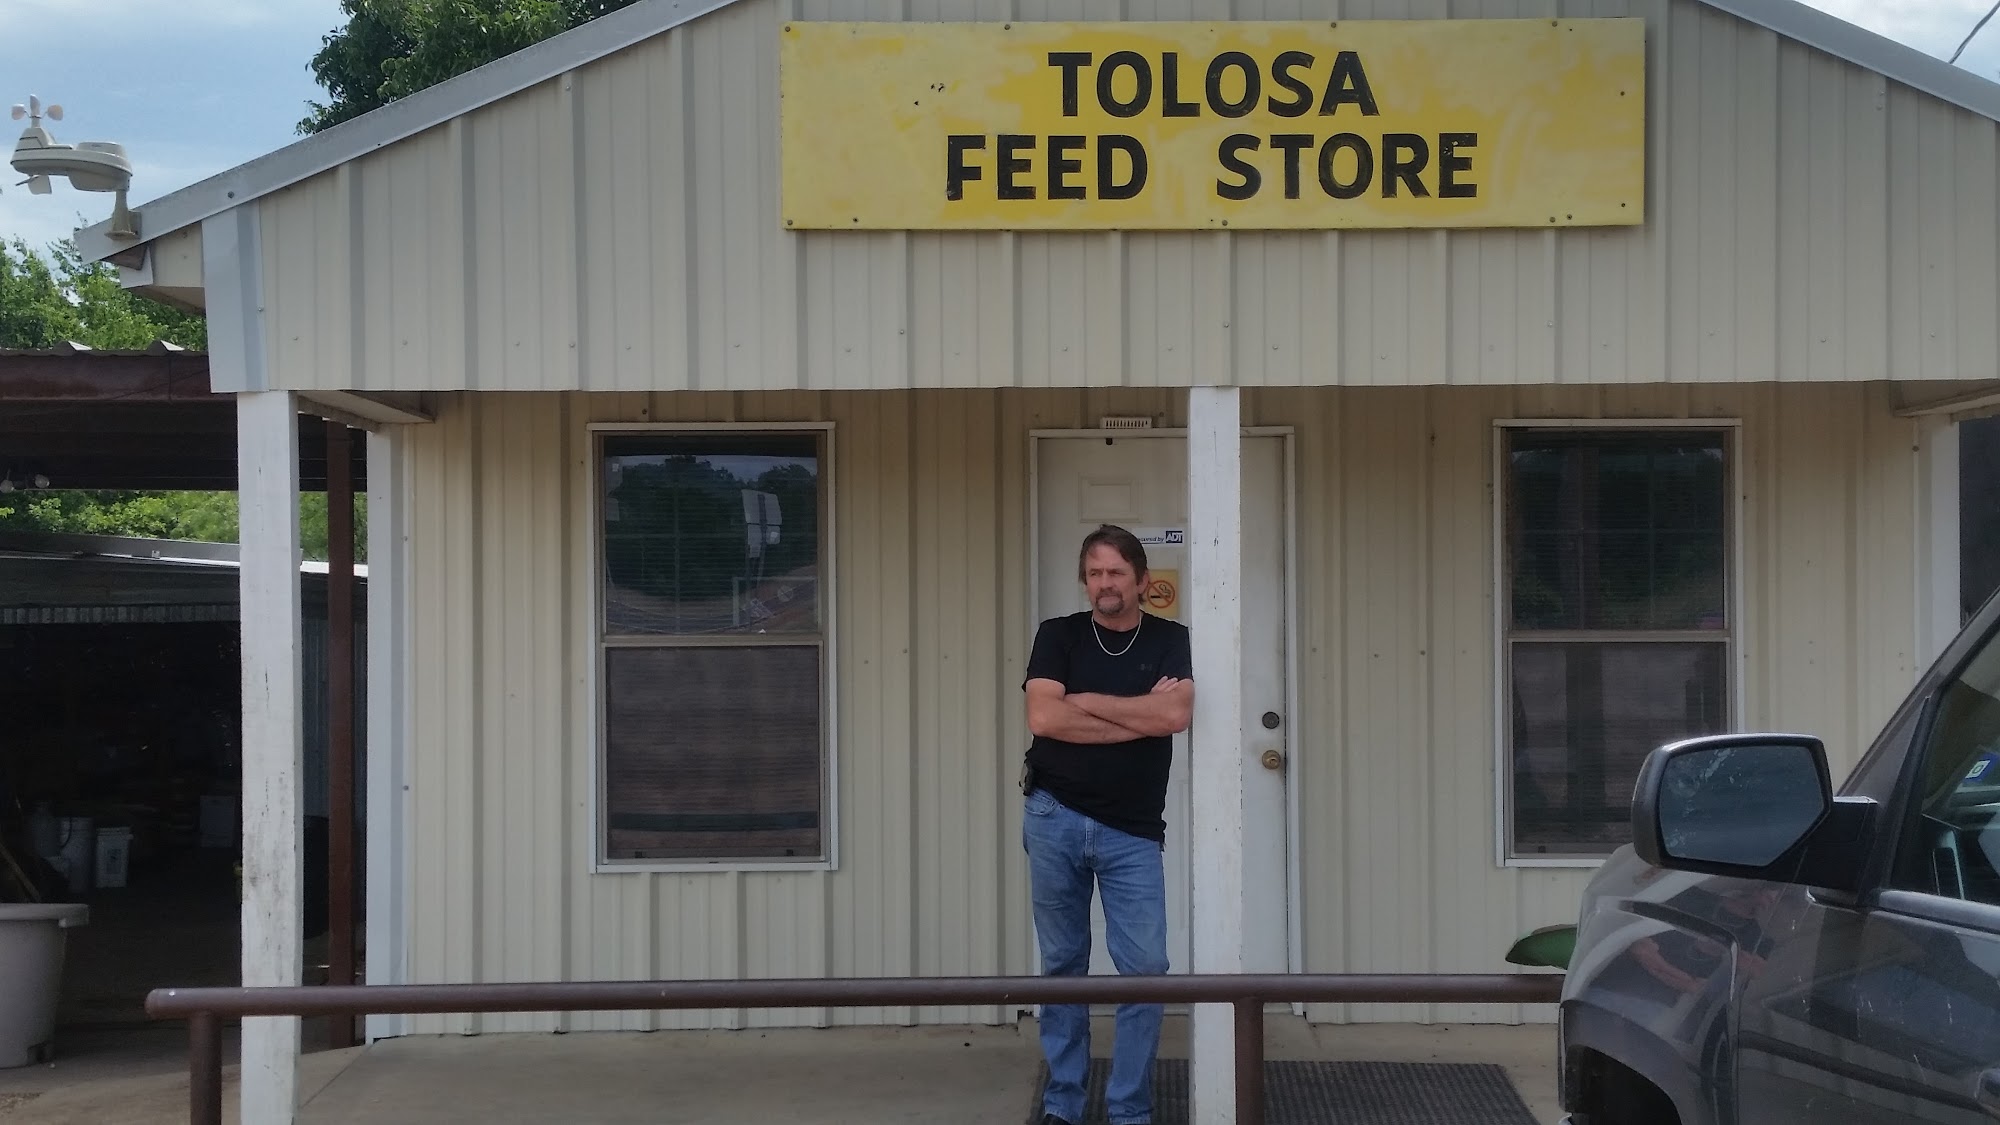 Tolosa Feed Store